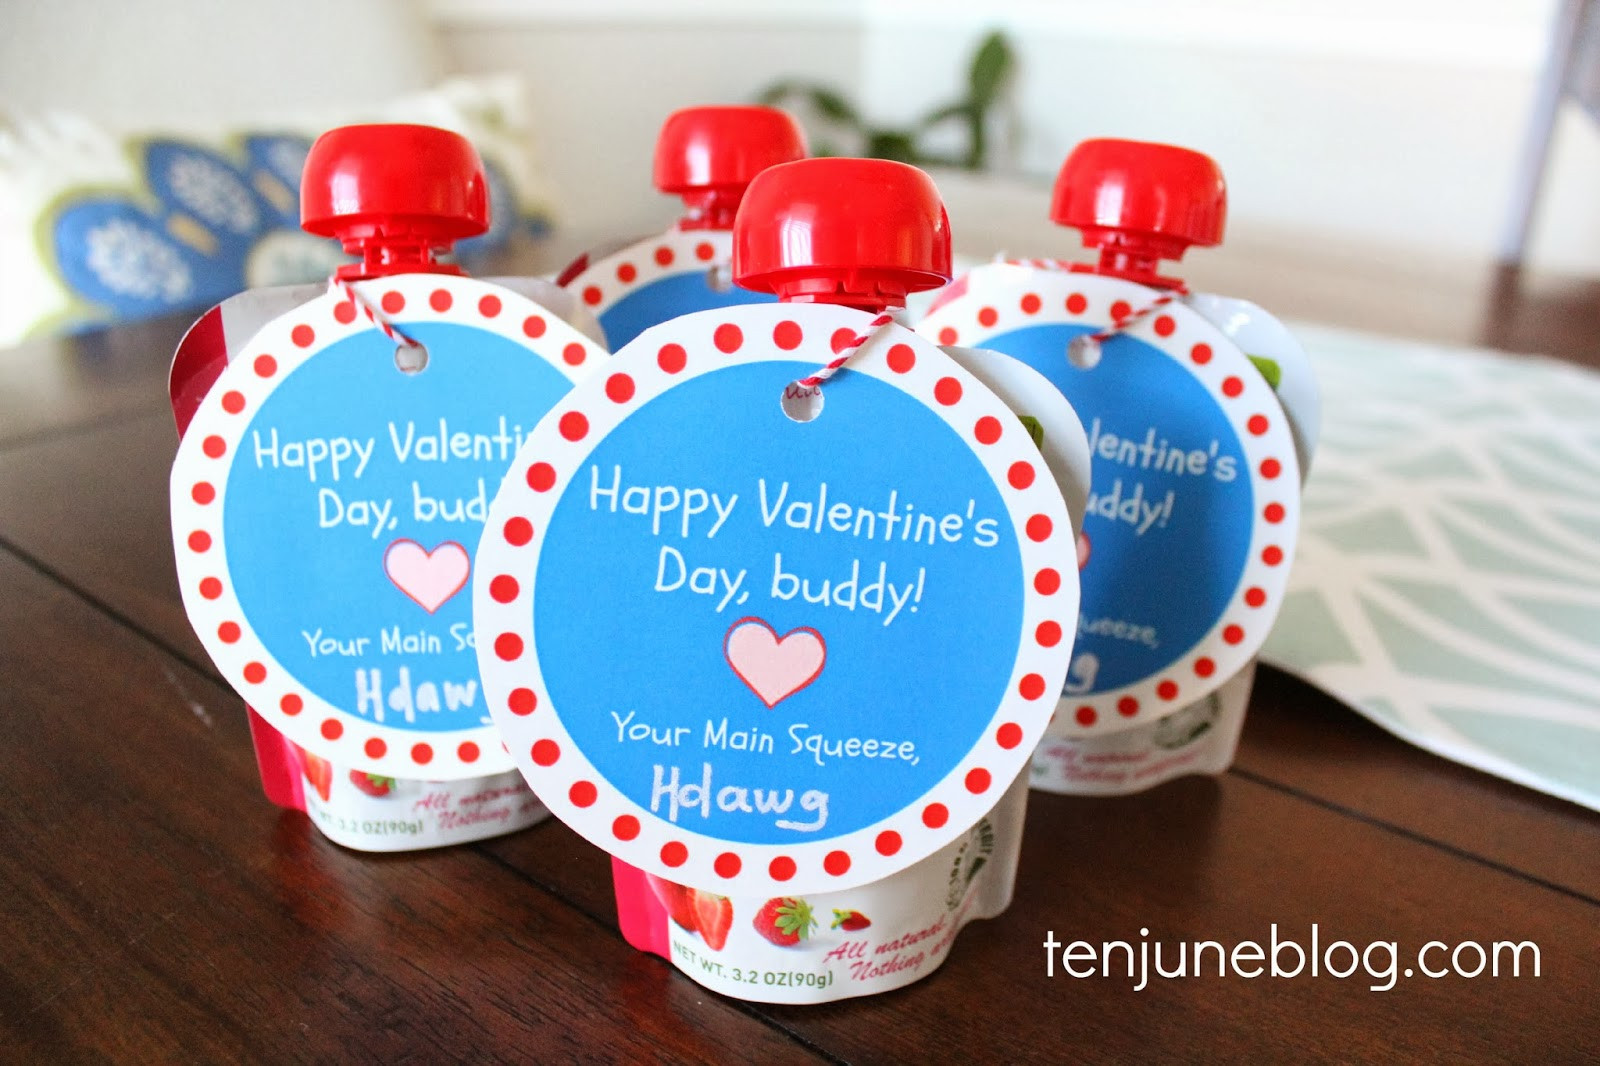 Valentine Gift Ideas For Infants
 Ten June Valentine s Day Card Printable for Toddlers My